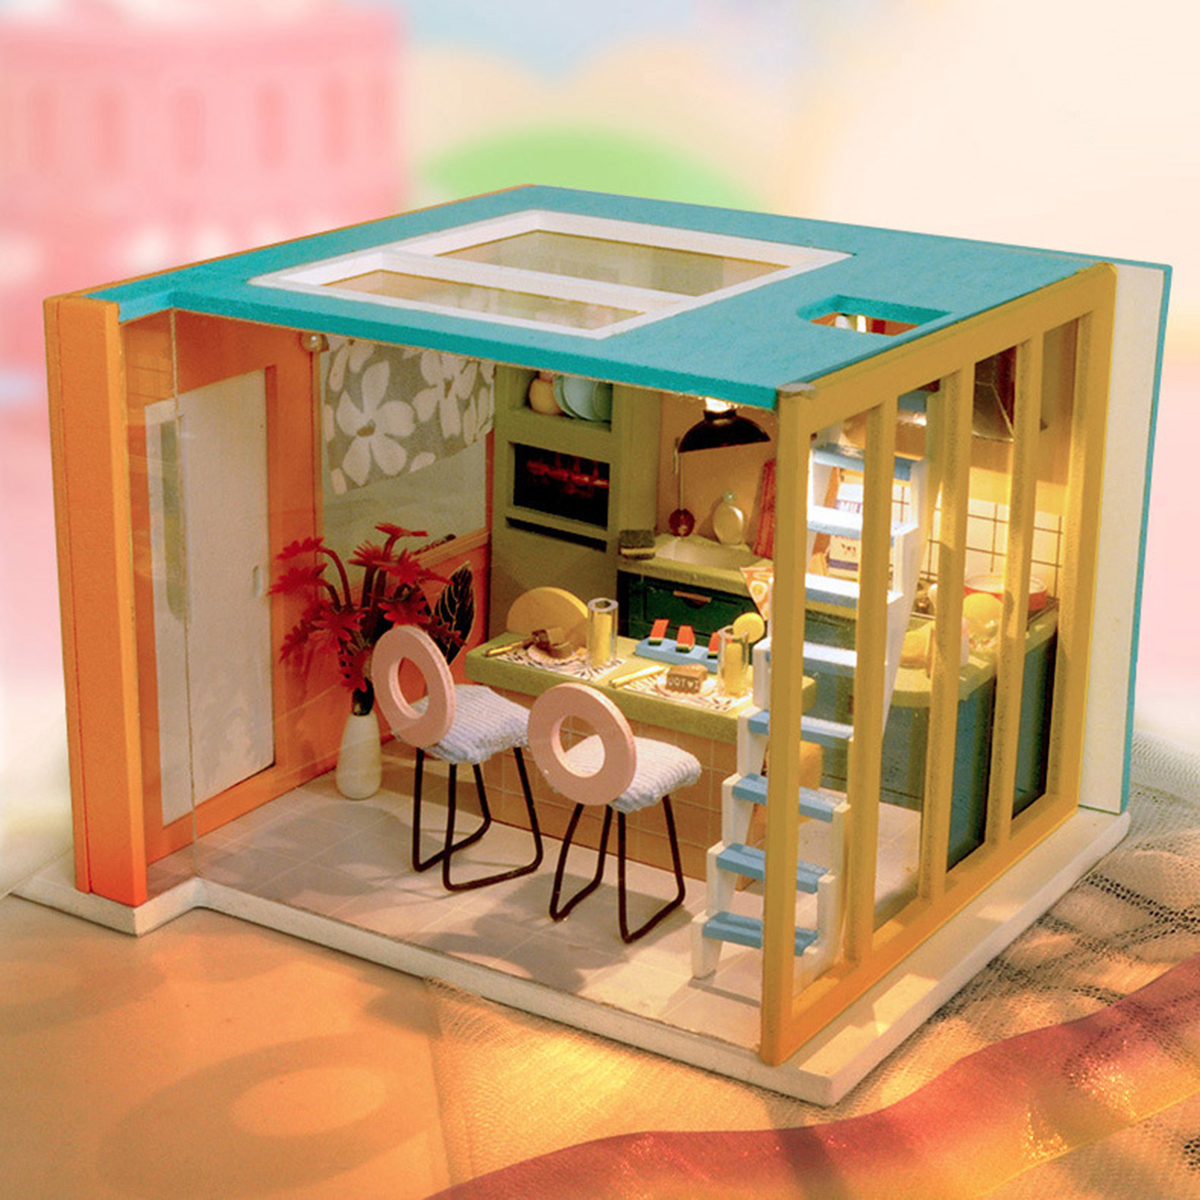 Wooden Kitchen DIY Handmade Assemble Doll House Miniature Furniture Kit Education Toy with LED Light for Kids Gift Collection - Photo: 2